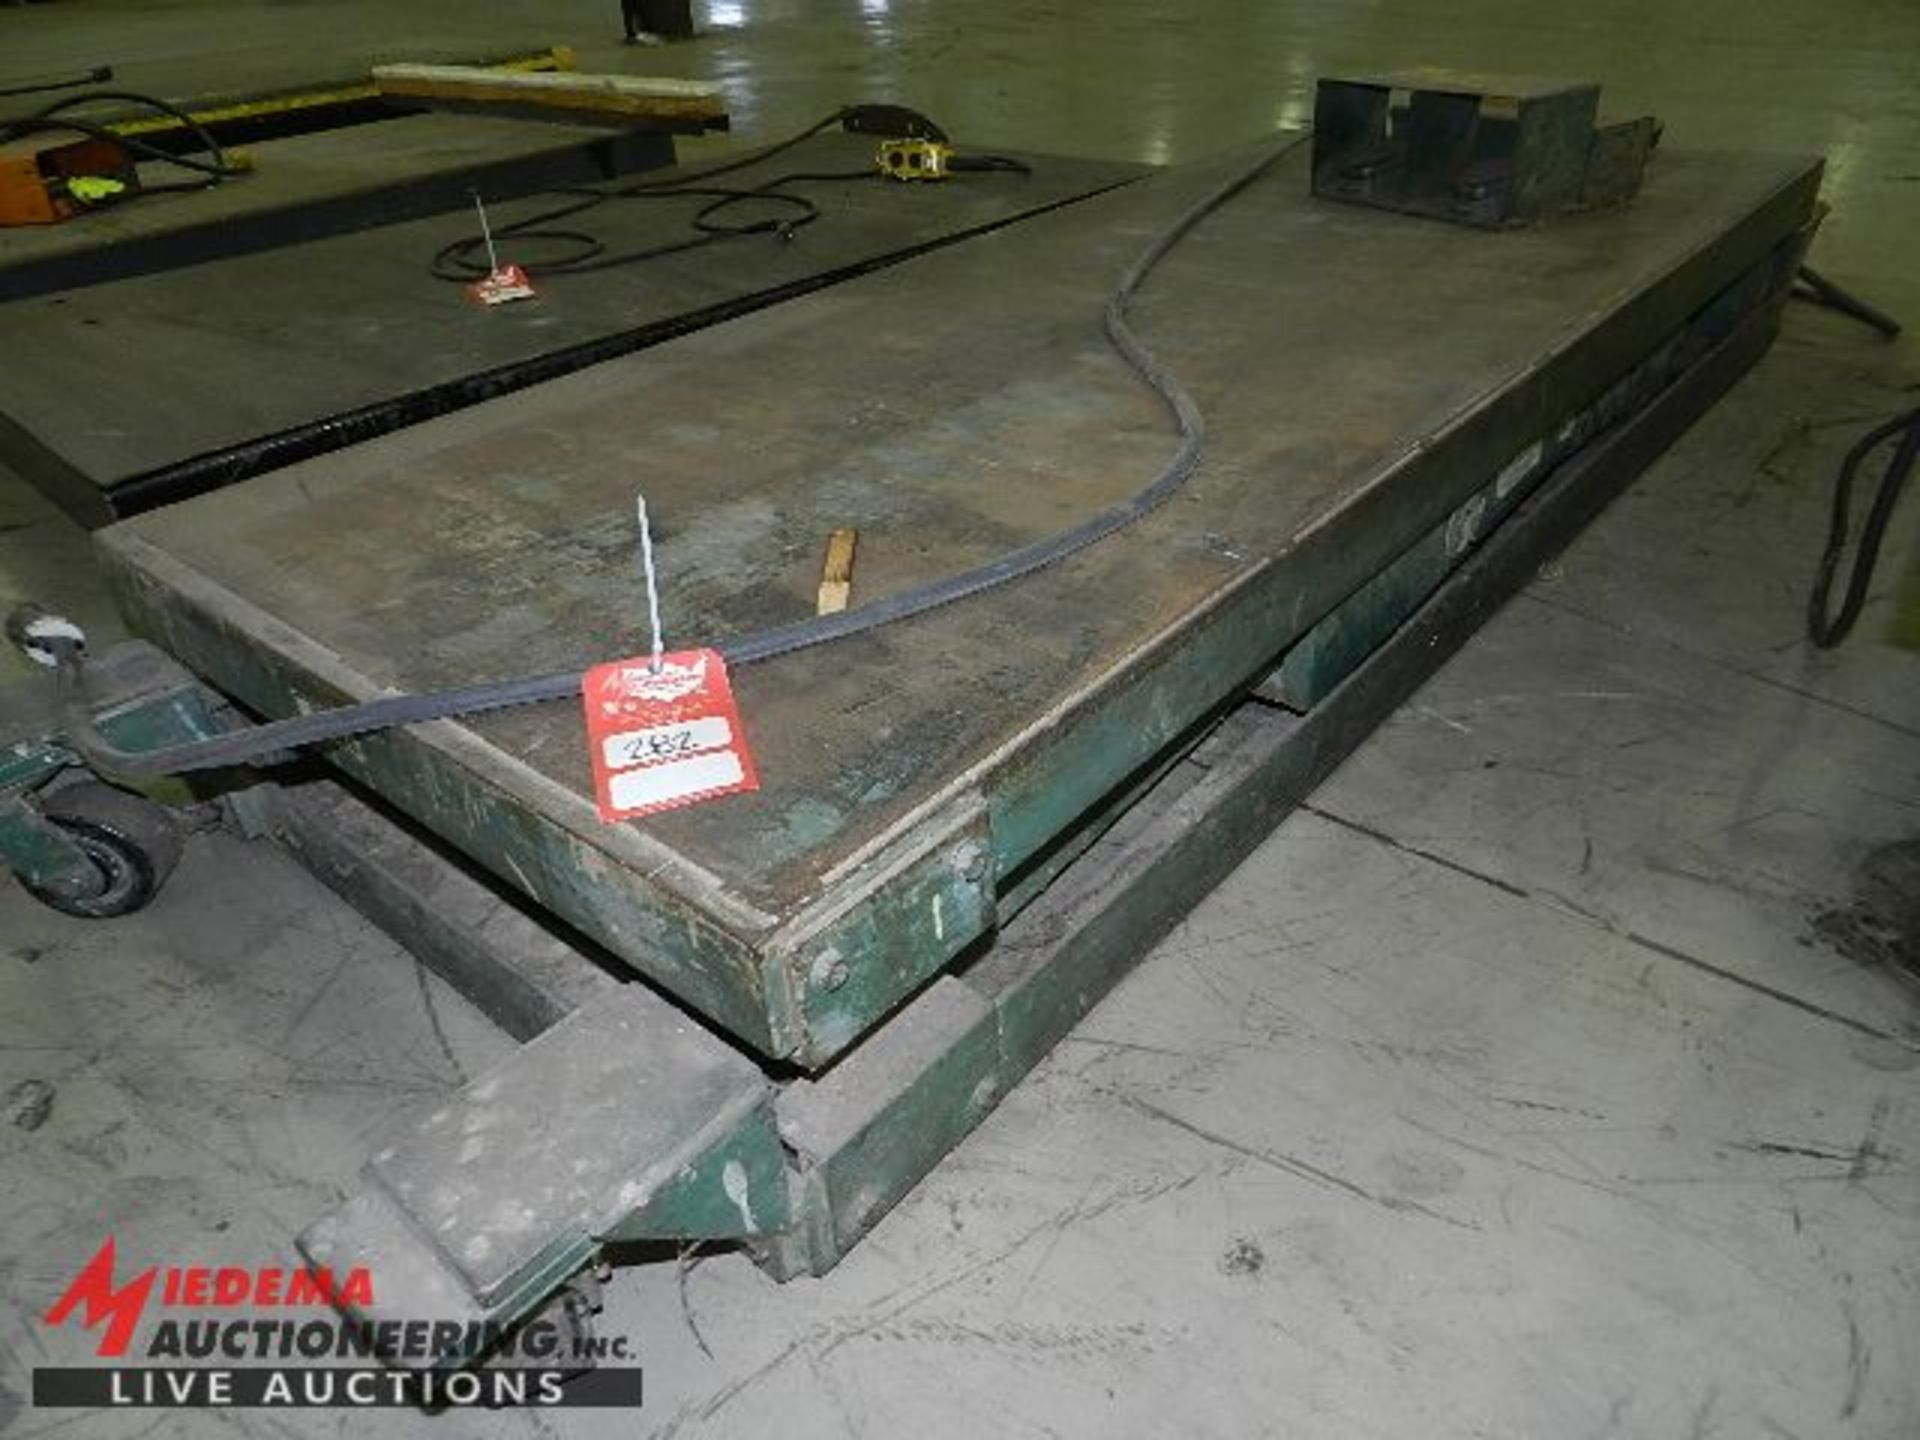 ELECTRIC LIFT TABLE, 6' X 30" WIDE WITH FOOT PEDAL CONTROL, 120 VOLT - Image 2 of 2